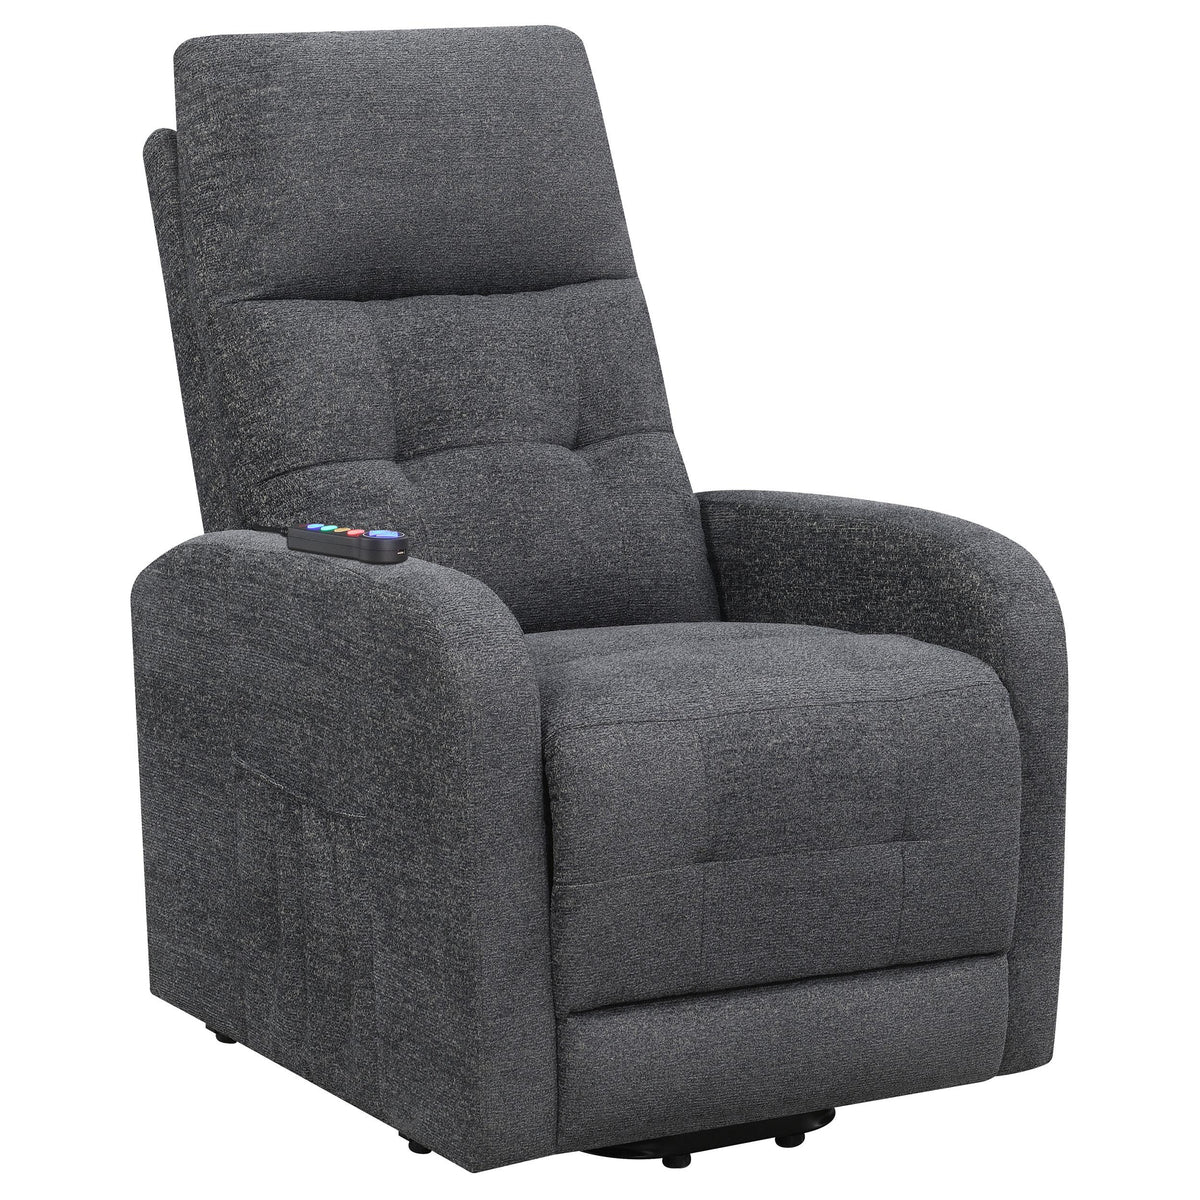 Howie Tufted Upholstered Power Lift Recliner Charcoal  Las Vegas Furniture Stores